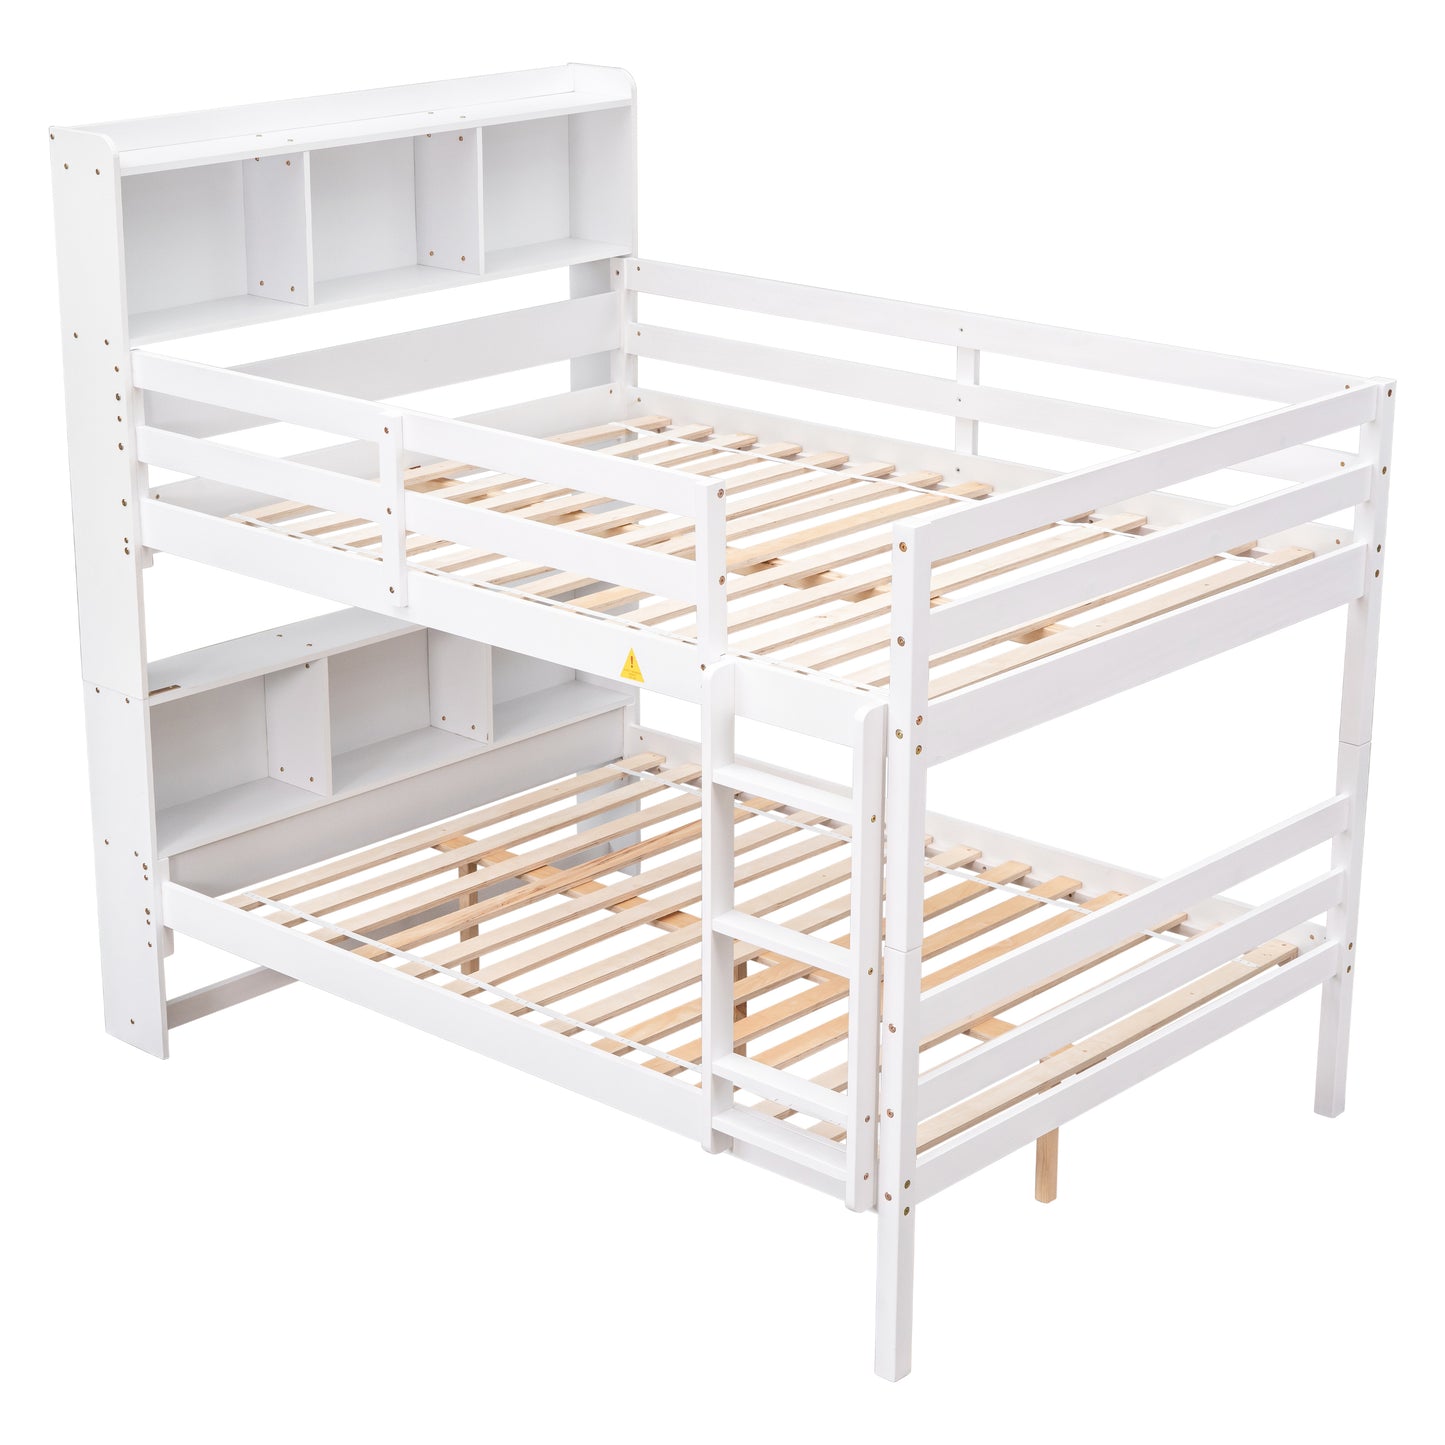 Inspirit Full over Full Convertible Bunk Bed with Bookcase Headboard - White